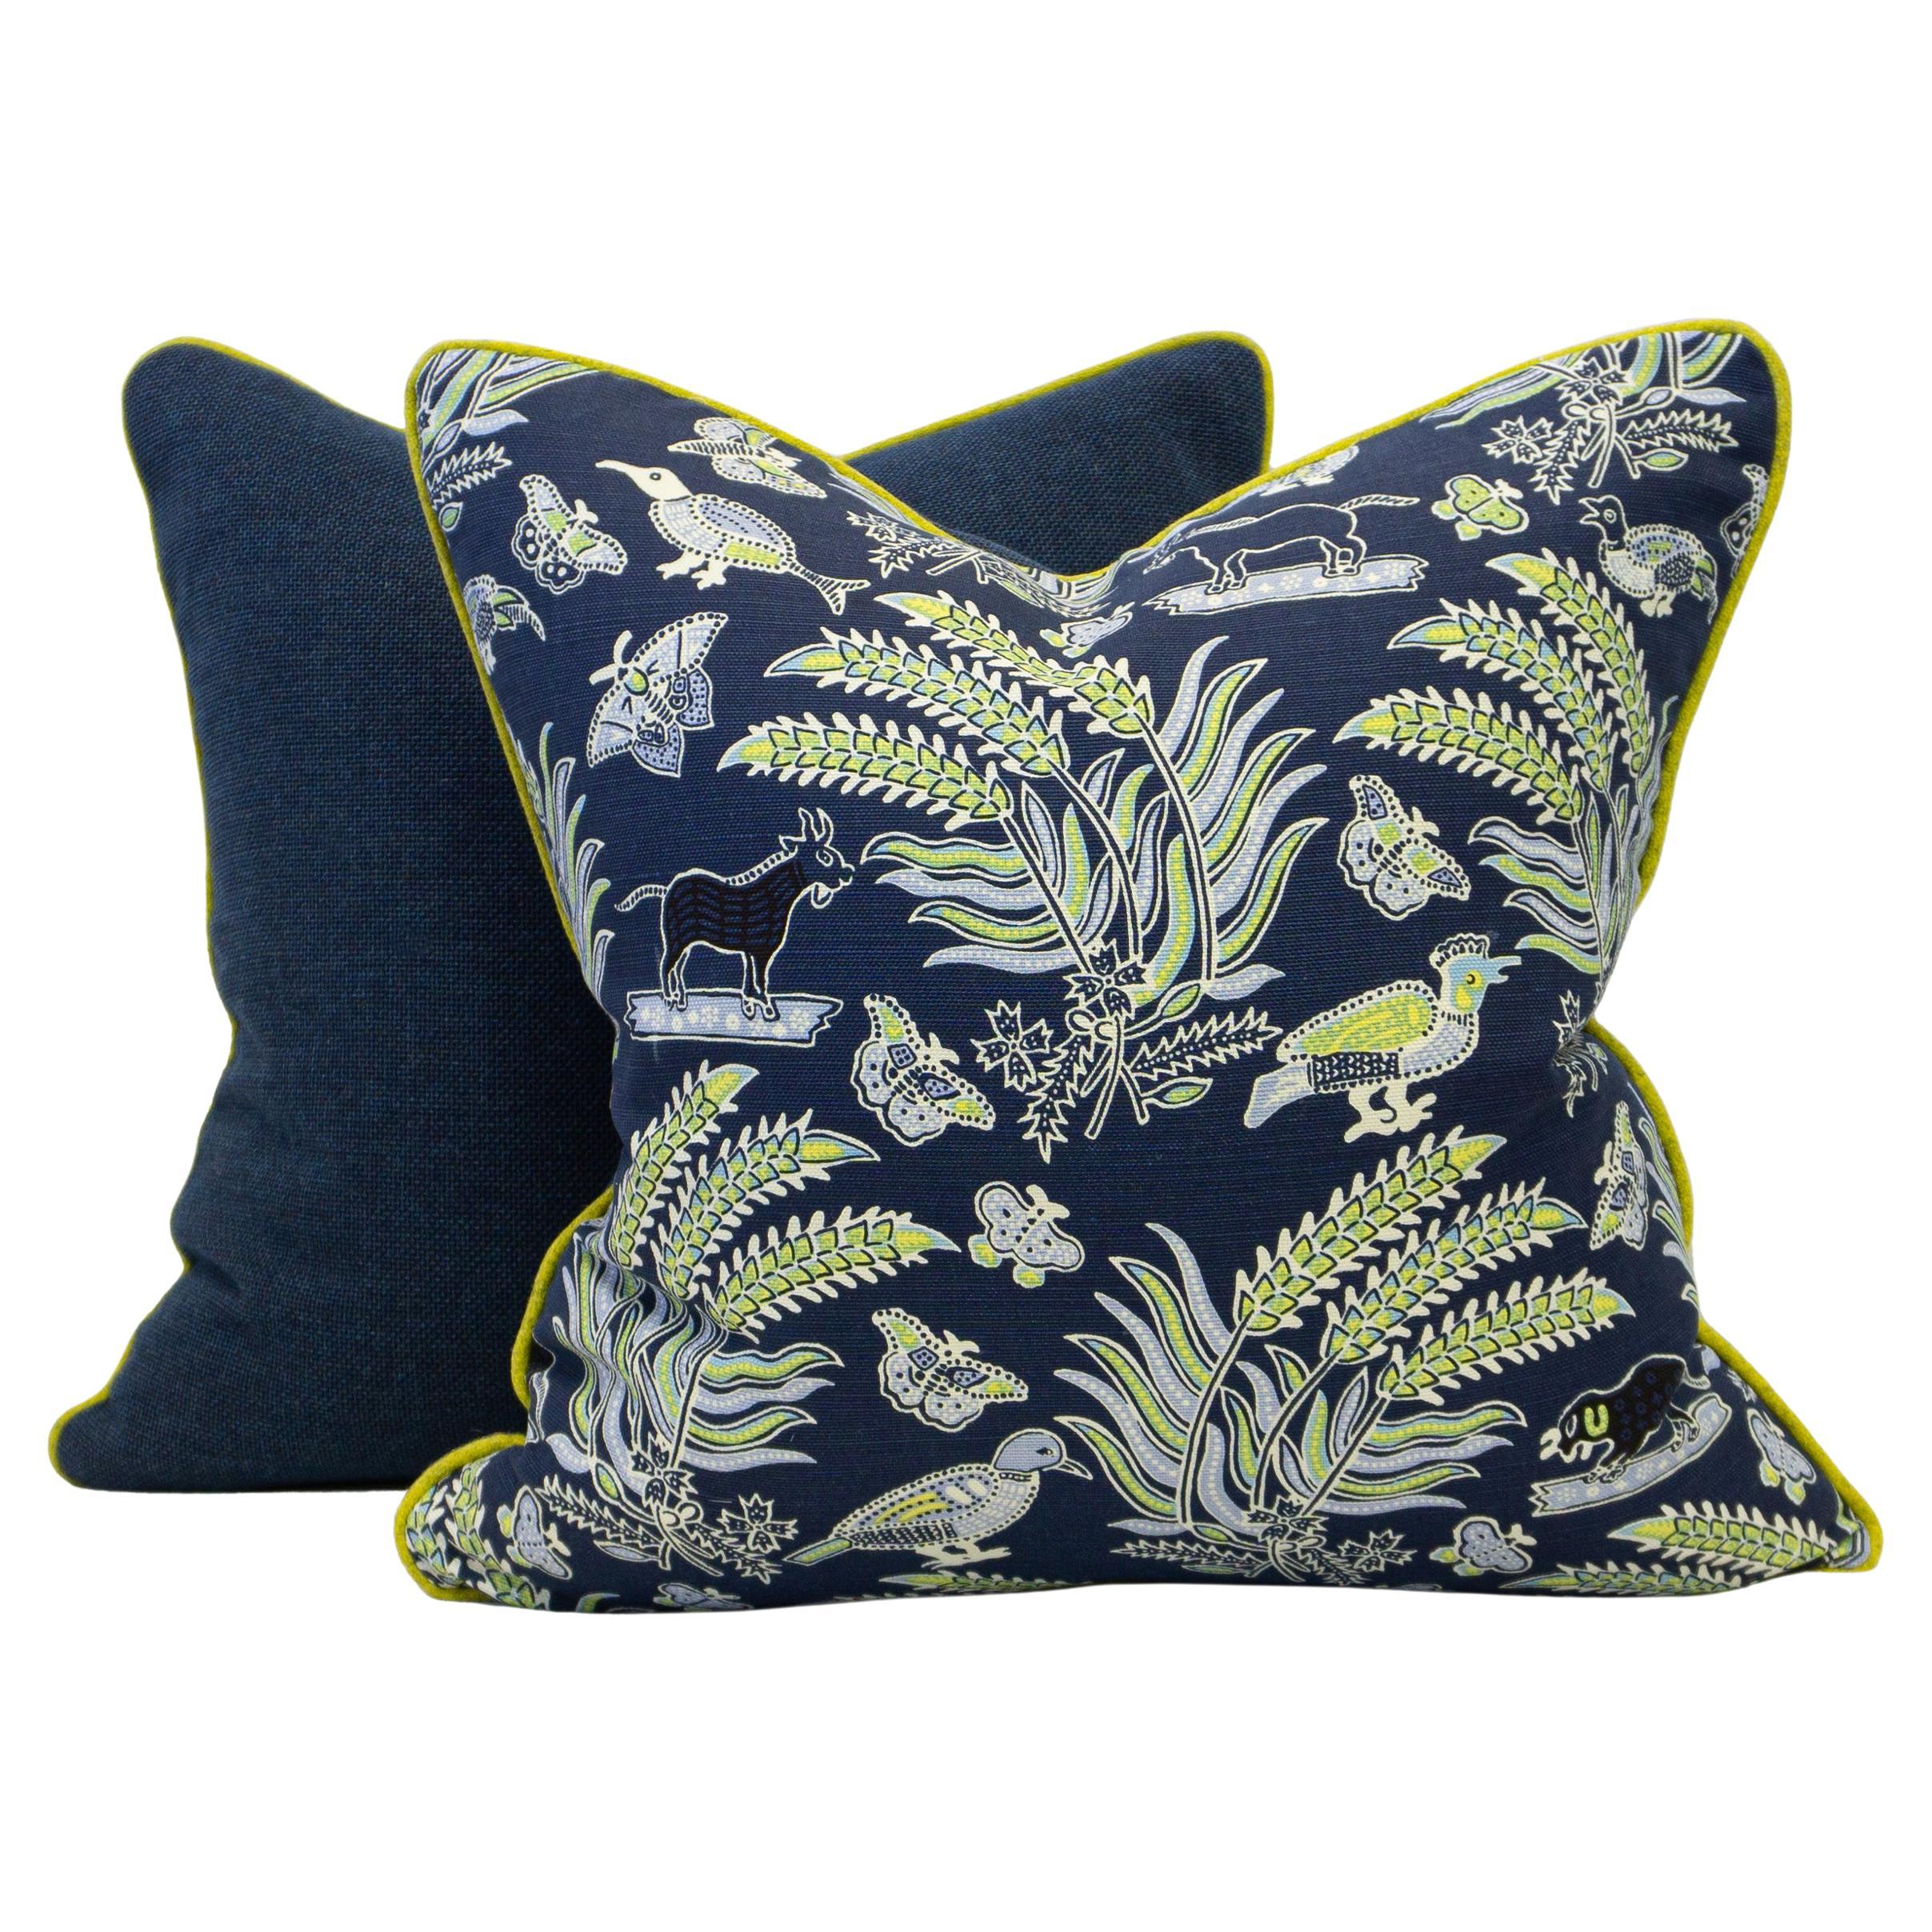 Navy Blue Printed Linen Fabric with Yellow Trim Square Pillows For Sale